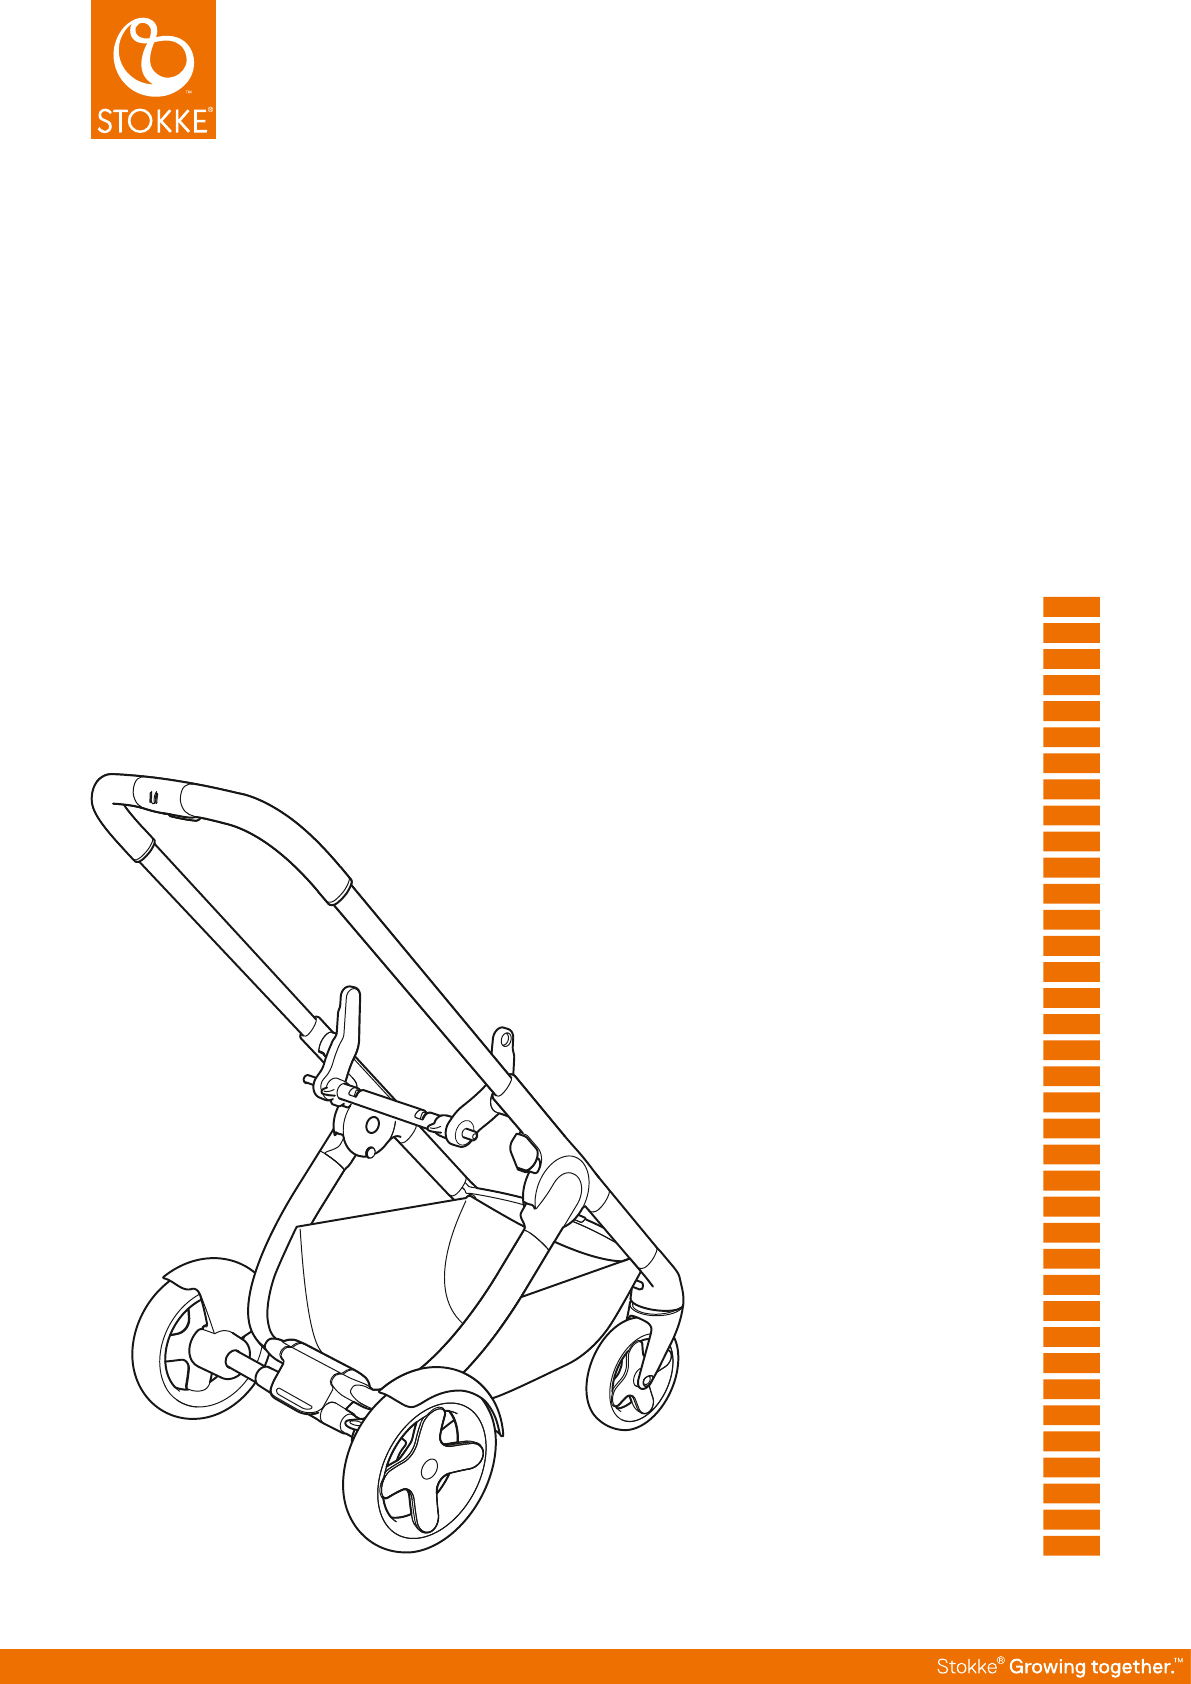 Stokke Crusi Chassis (page 1 of 100)